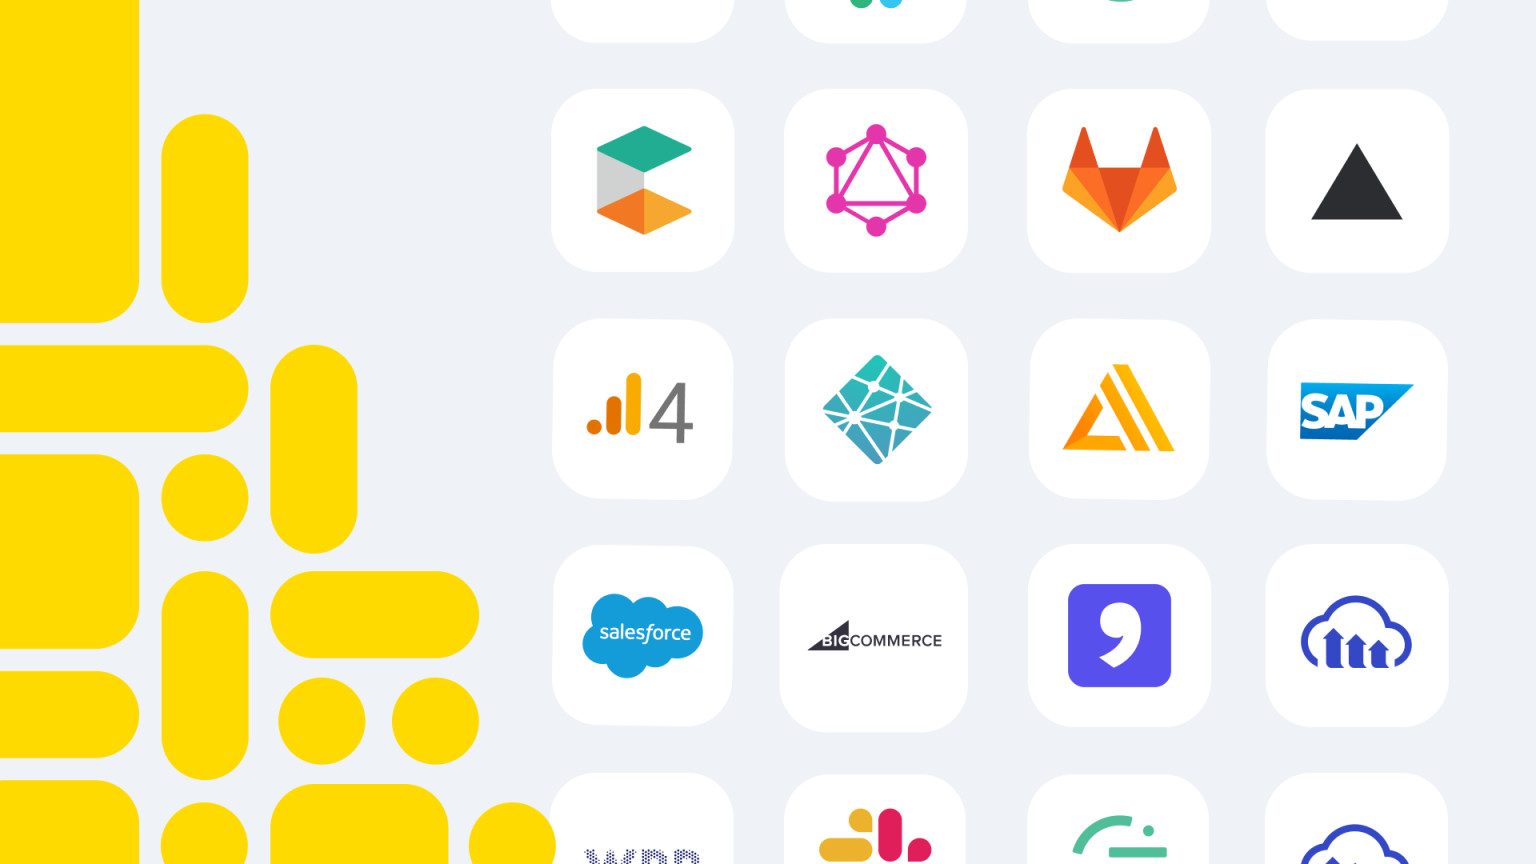 Welcome to the Integration Roundup, where we spotlight new integrations added to the Contentful Marketplace and the terrific benefits they bring to users.